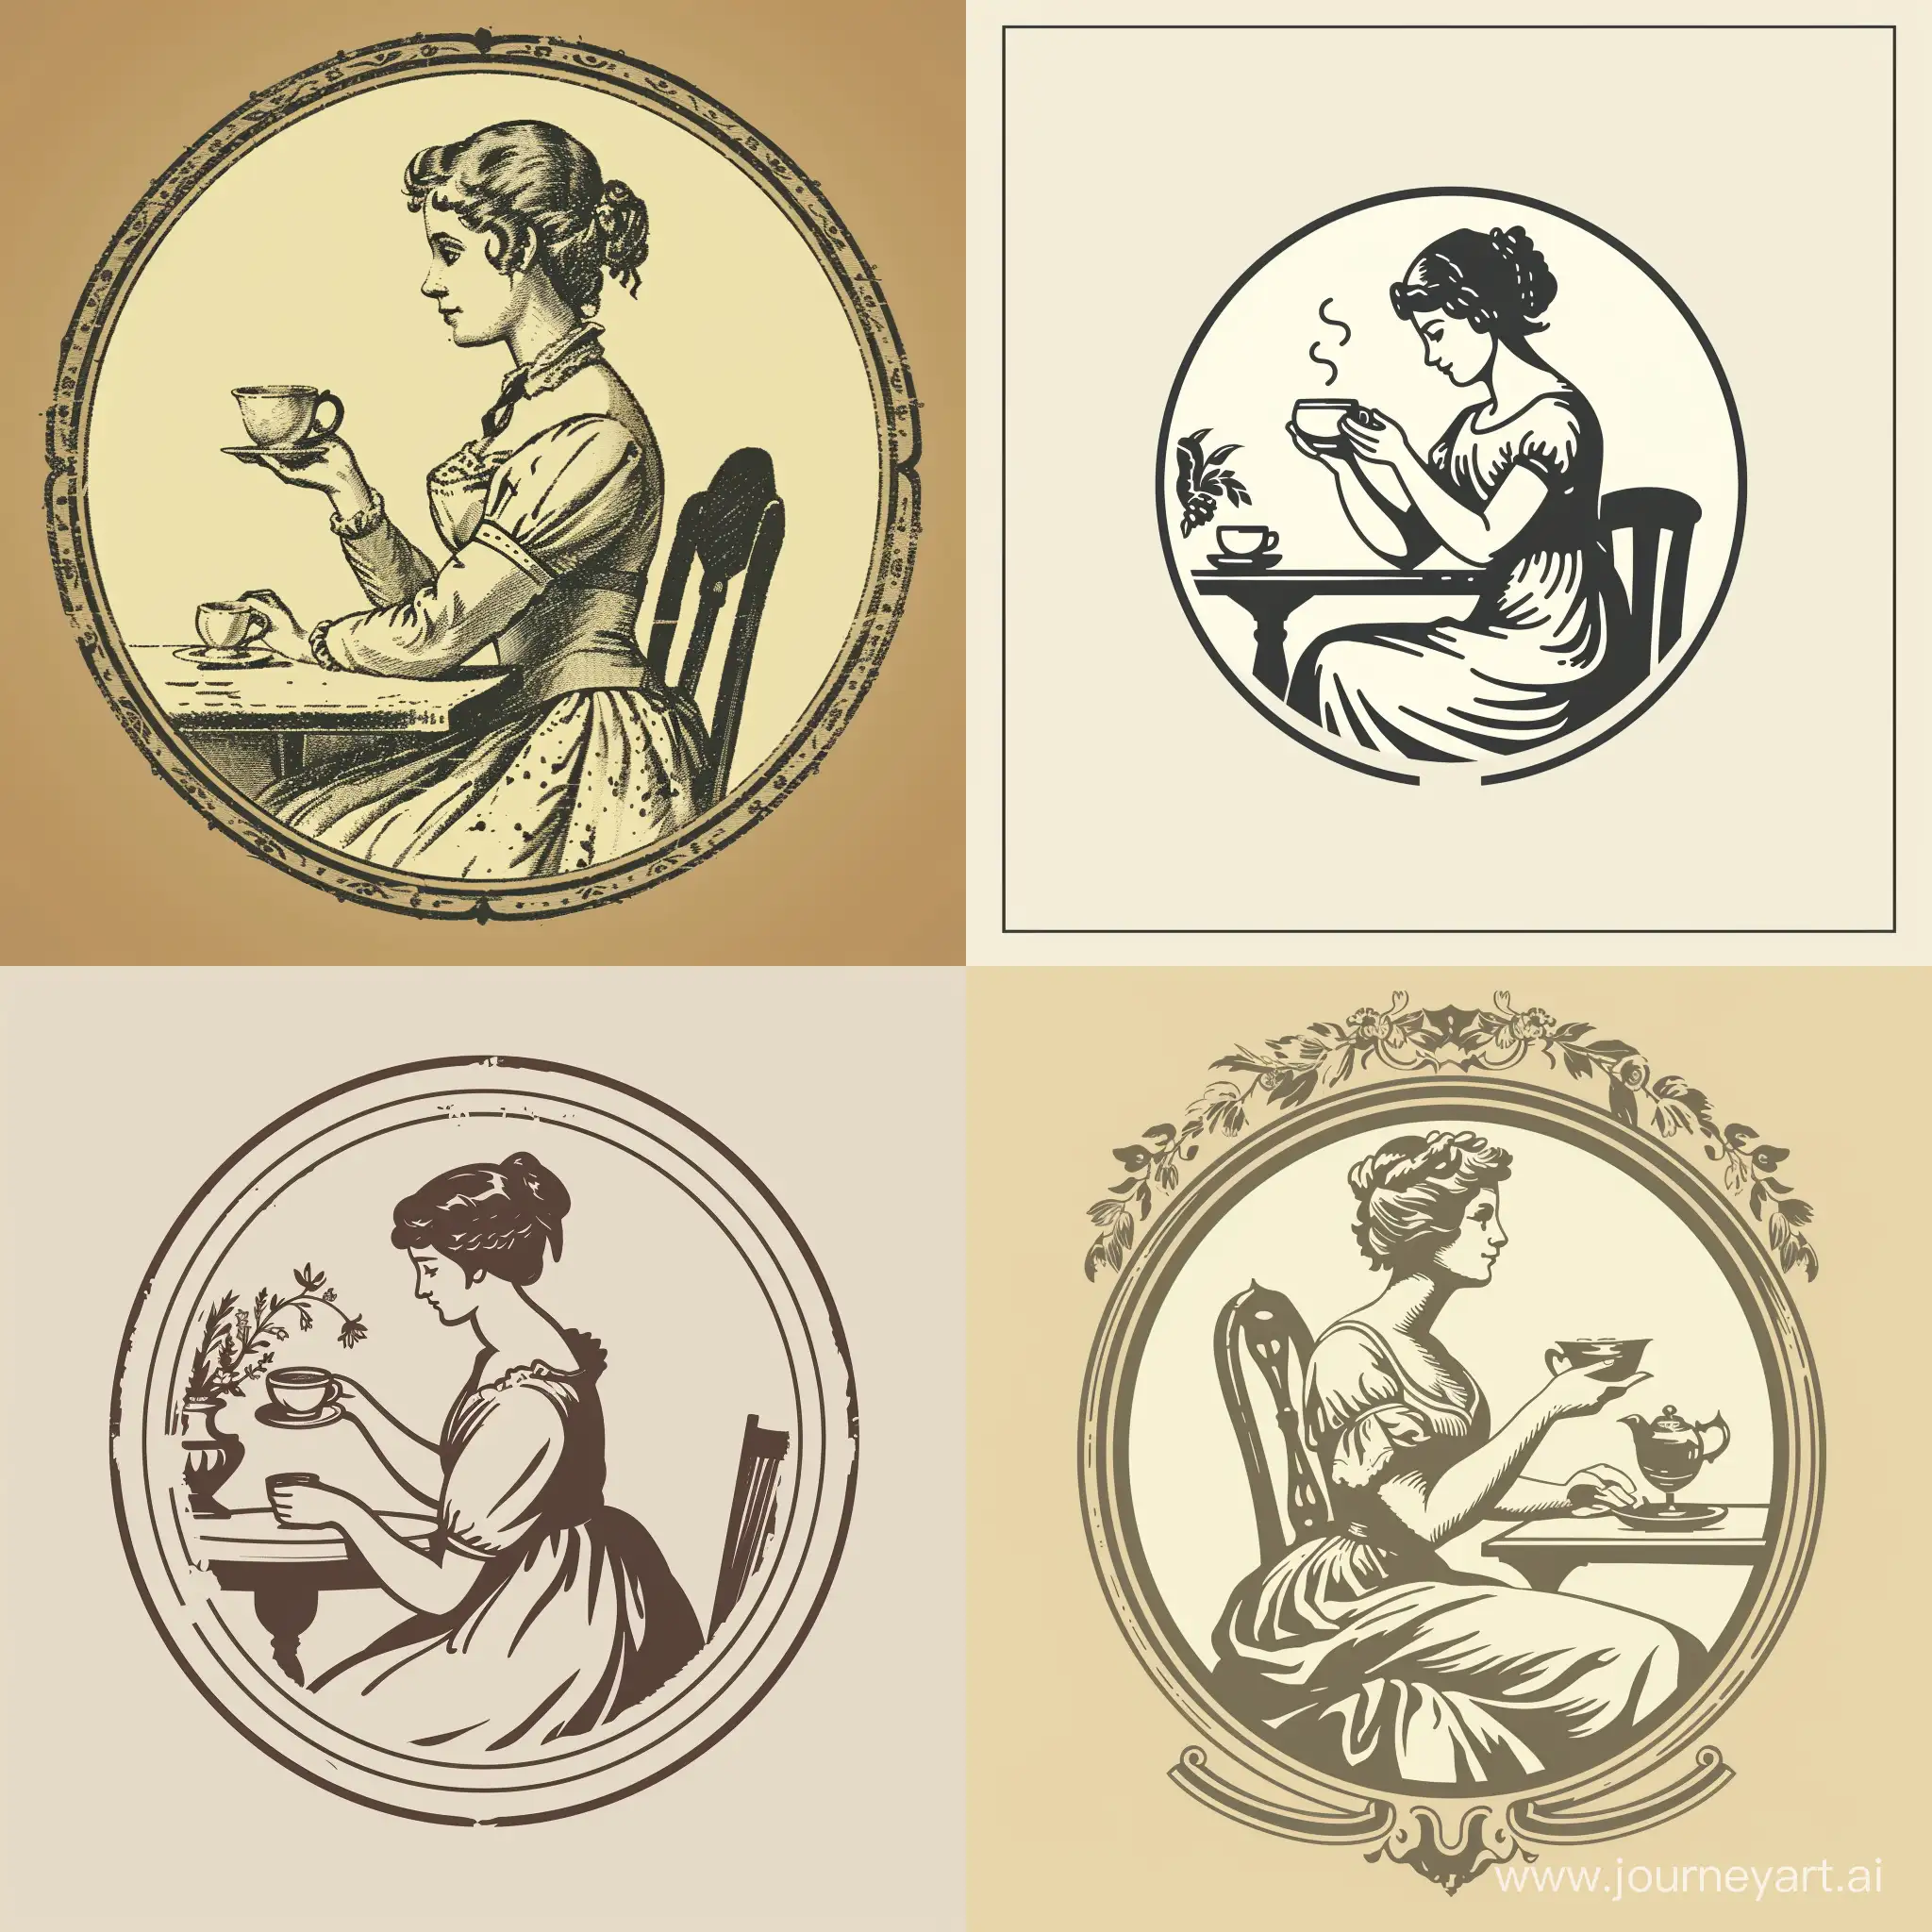 A 19th century logo of a woman in a simple dress, sitting at a table, holding a cup of tea in her hand,